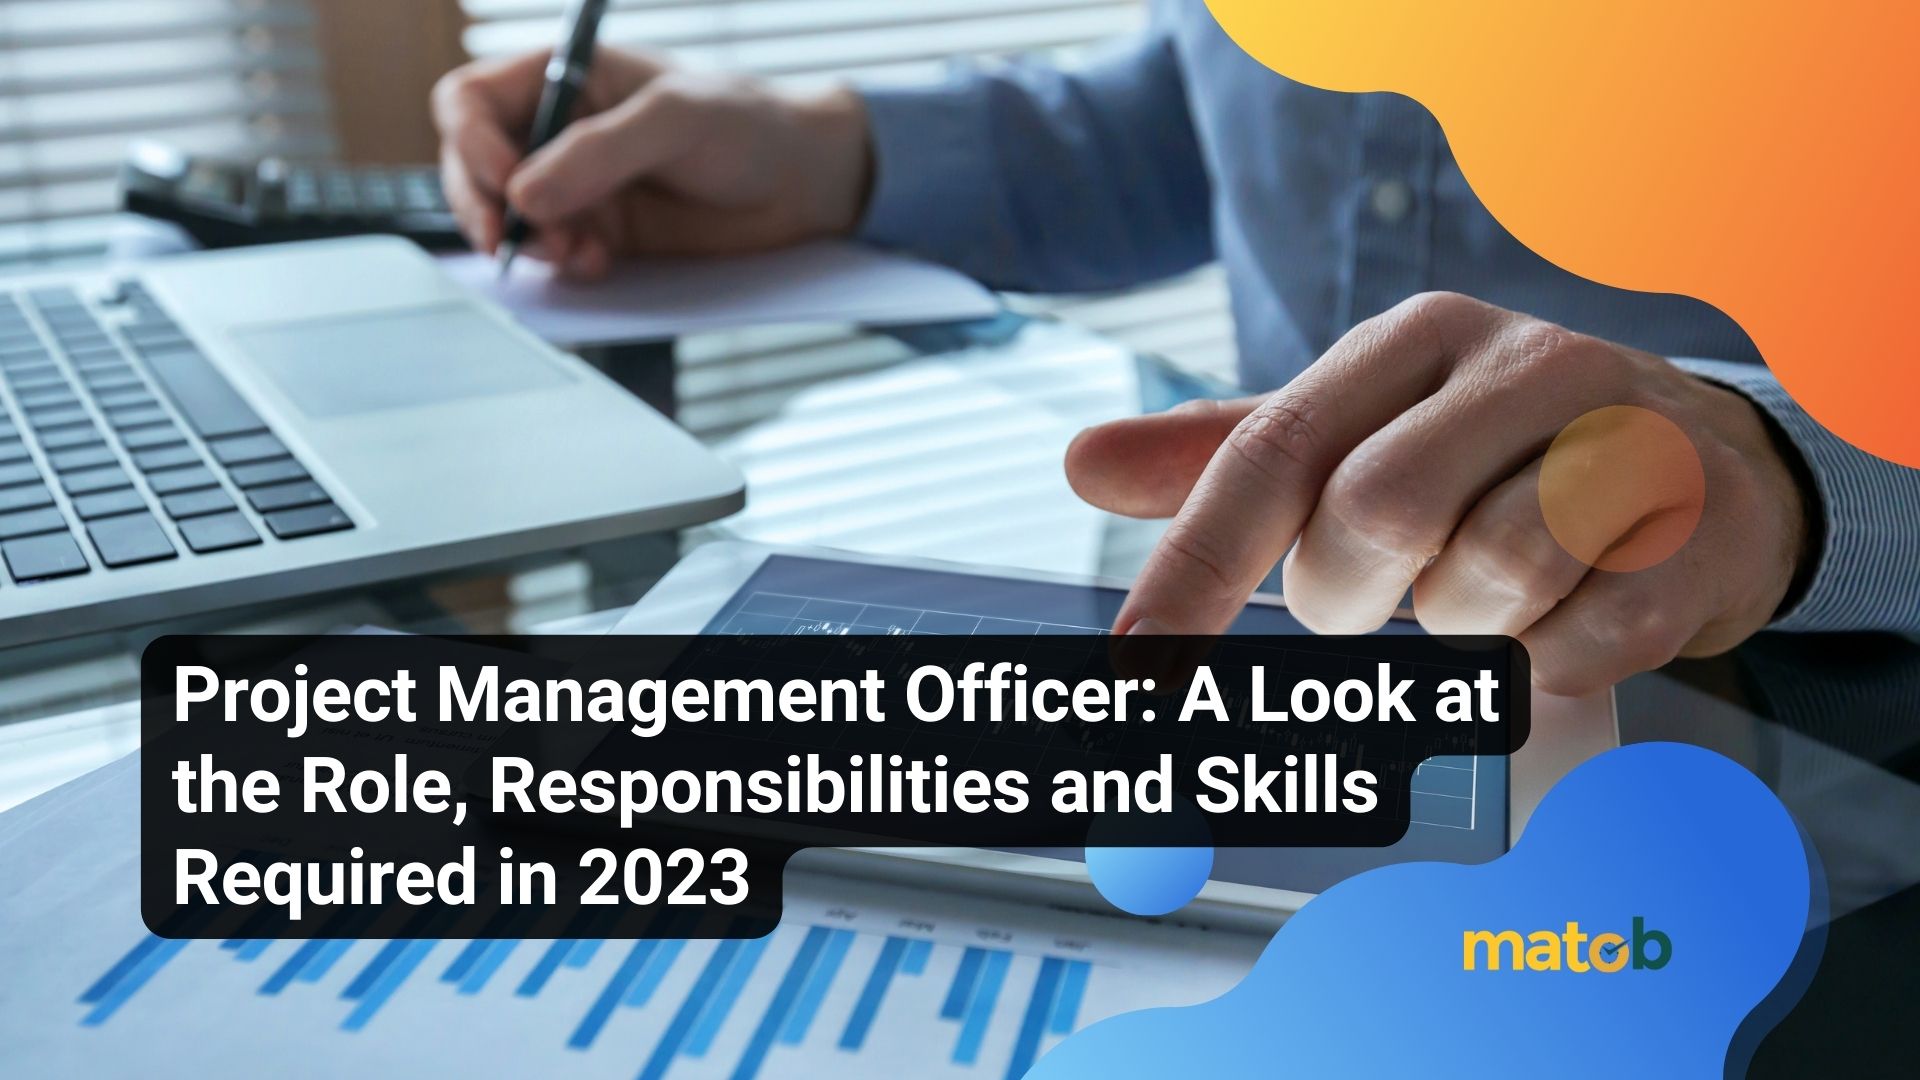 Project Management Officer: A Look at the Role, Responsibilities and Skills Required in 2023